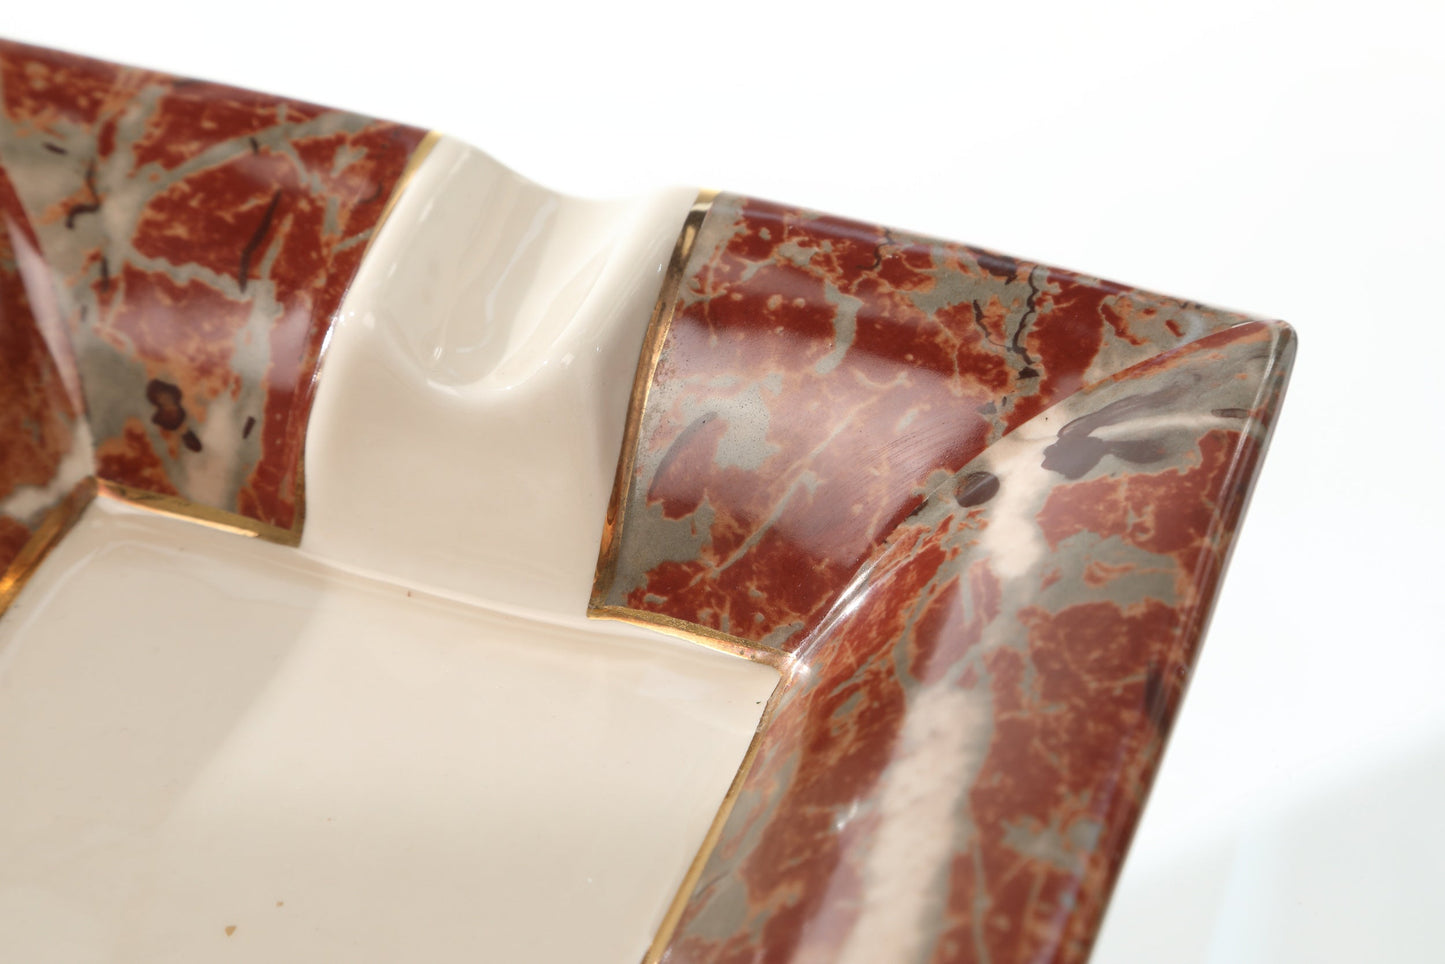 Tommaso Barbi marbled ashtray from the 70s